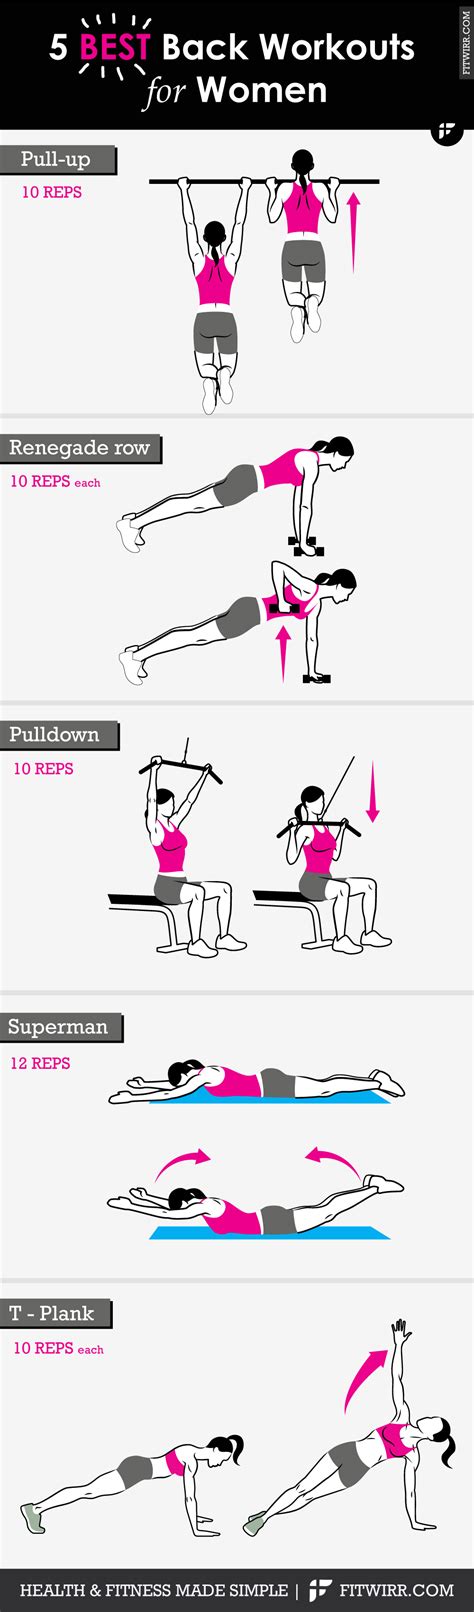 5 Best Back Workouts for Women to Get Sleek and Toned Back